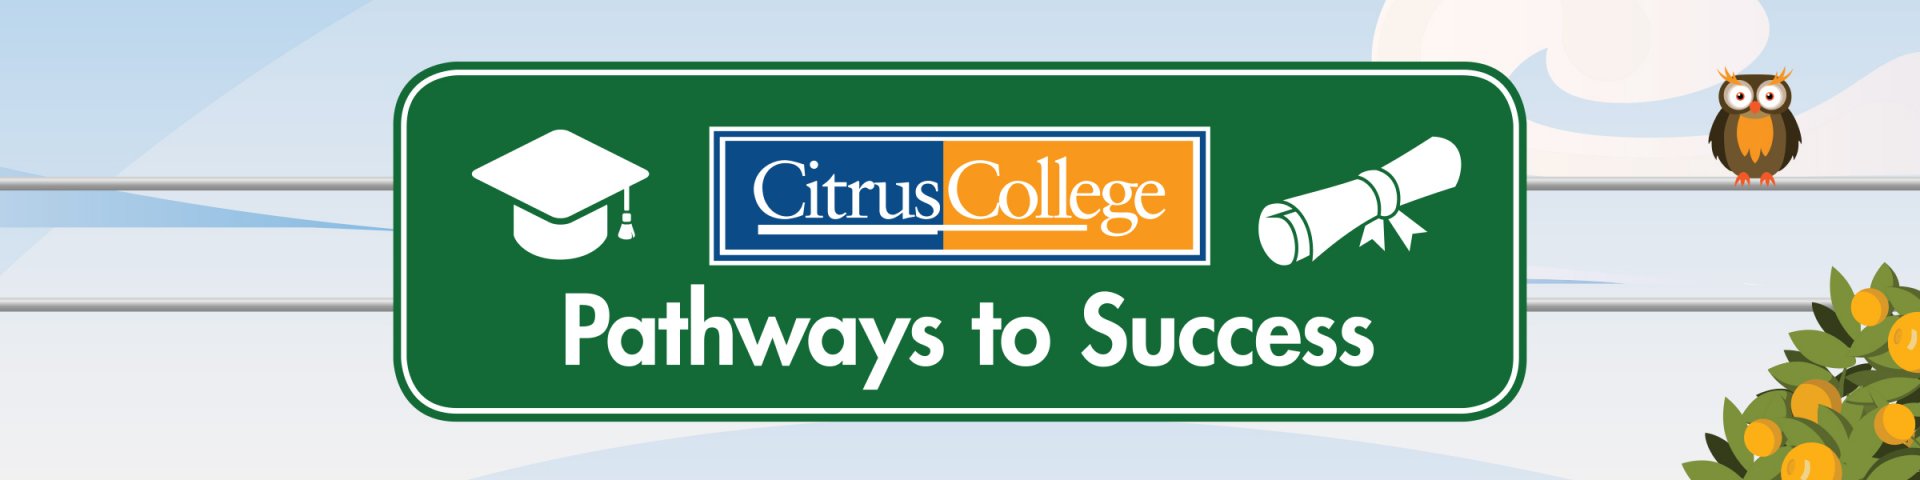 Guided Pathways, Pathways to Success